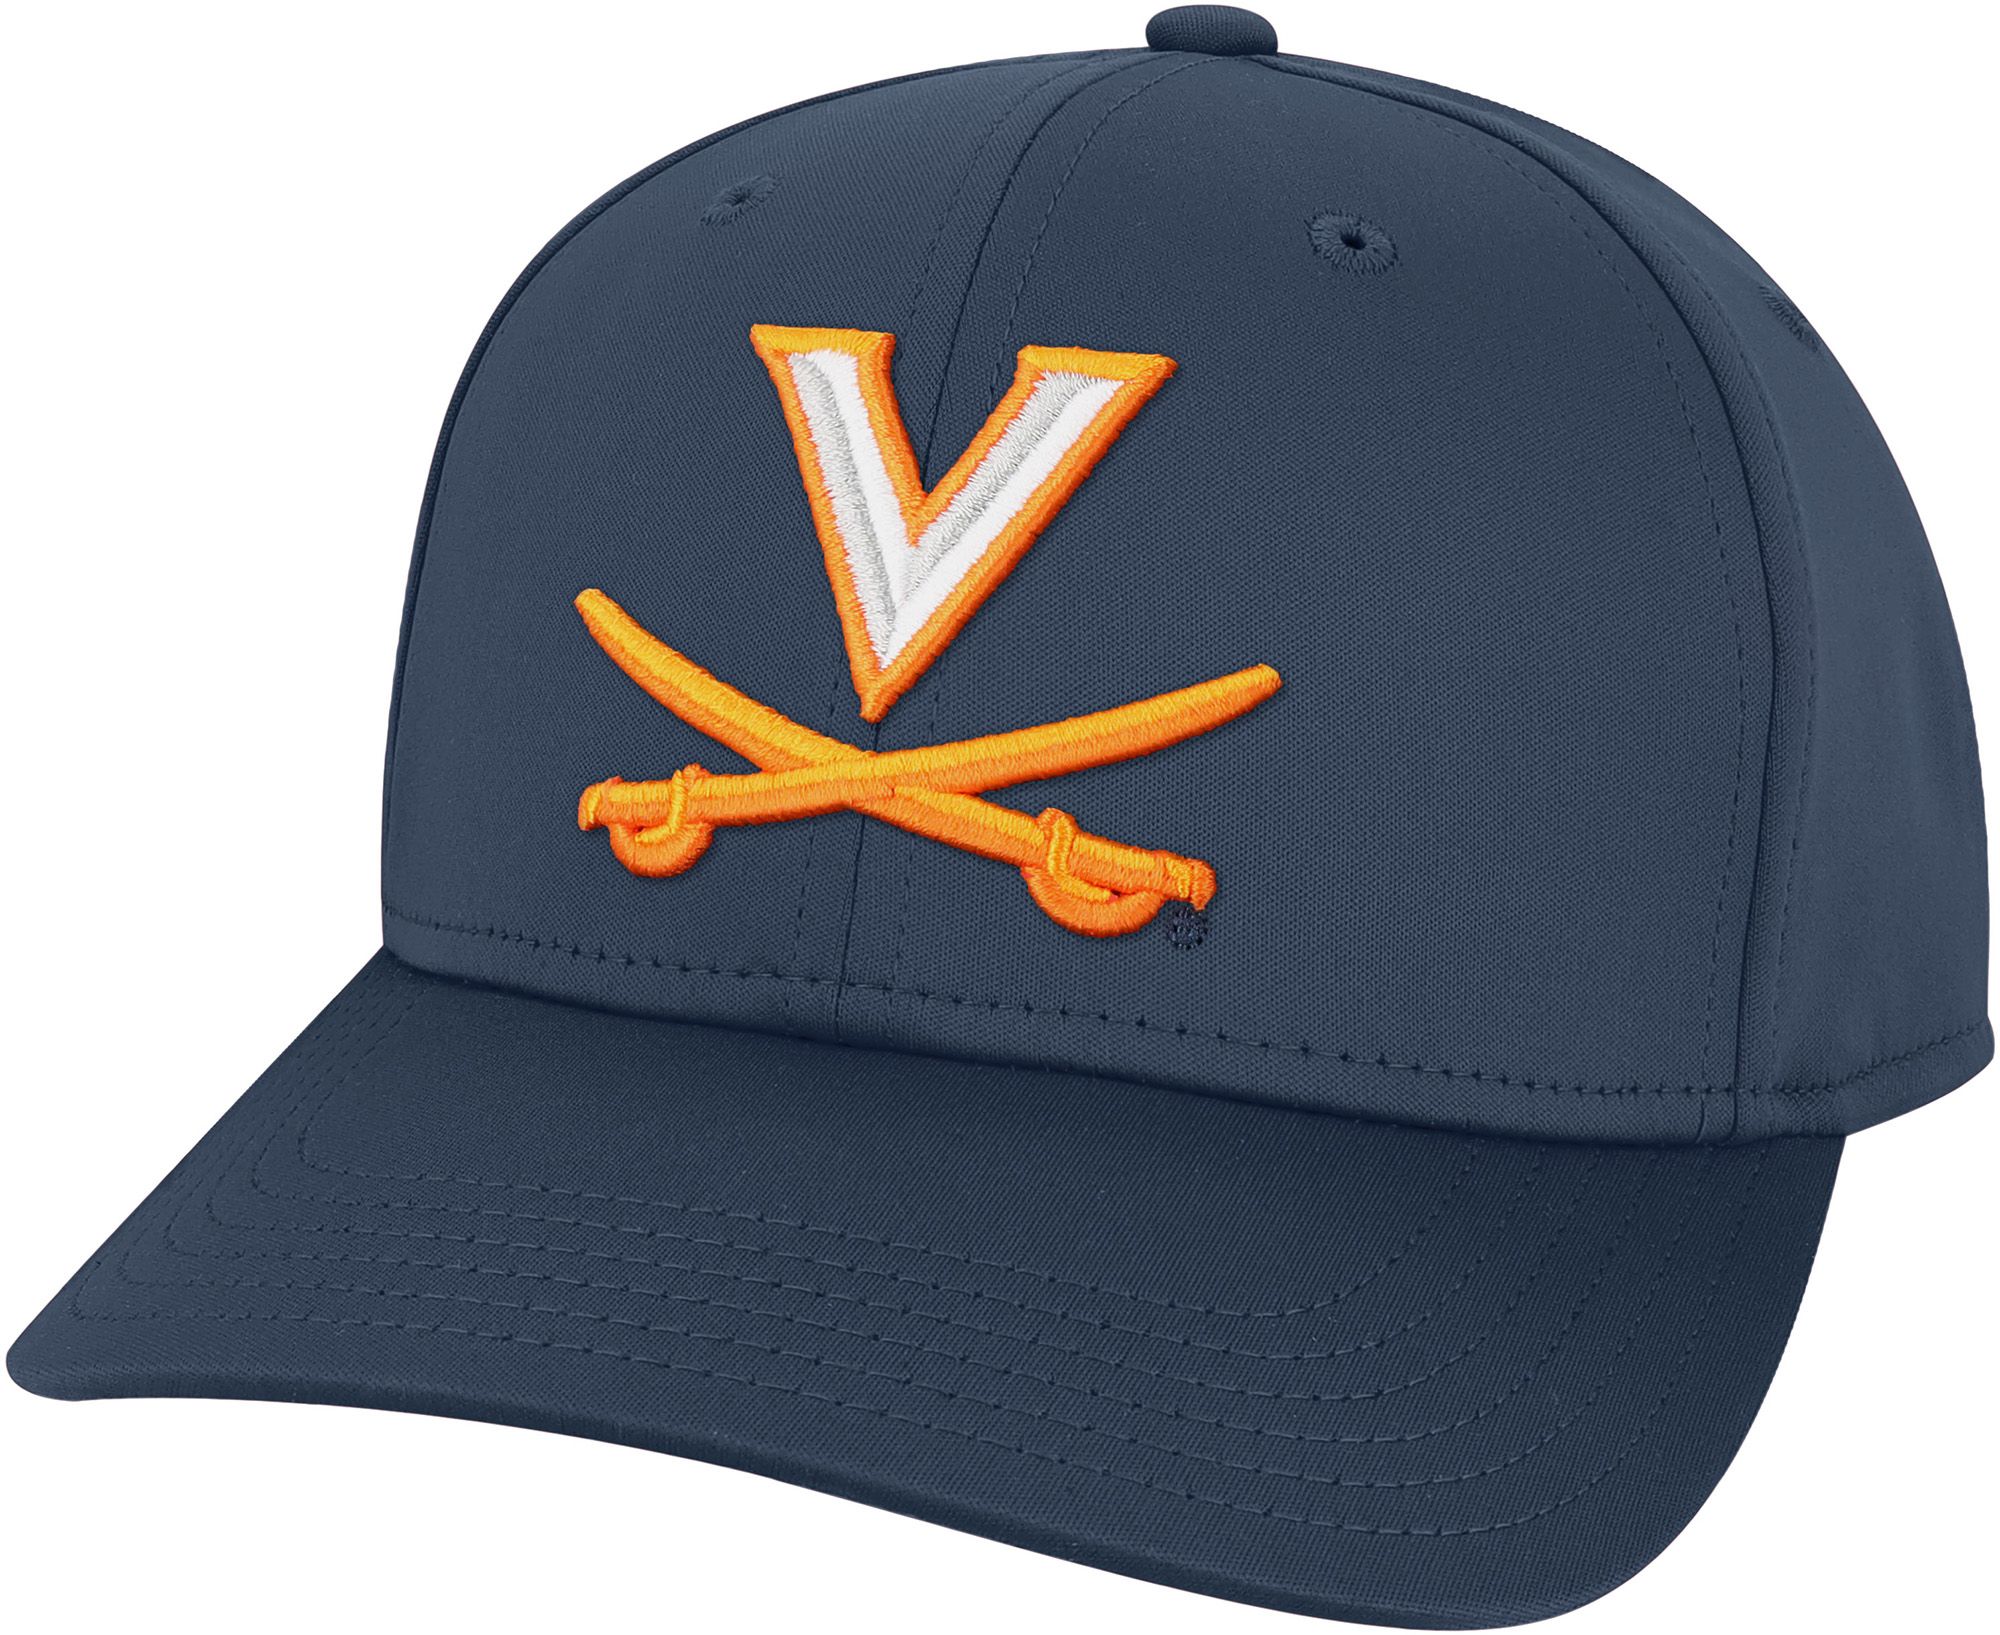 LEAGUE-LEGACY MEN'S VIRGINIA CAVALIERS BLUE COOL FIT STRETCH HAT INTERNATIONAL SHIPPING